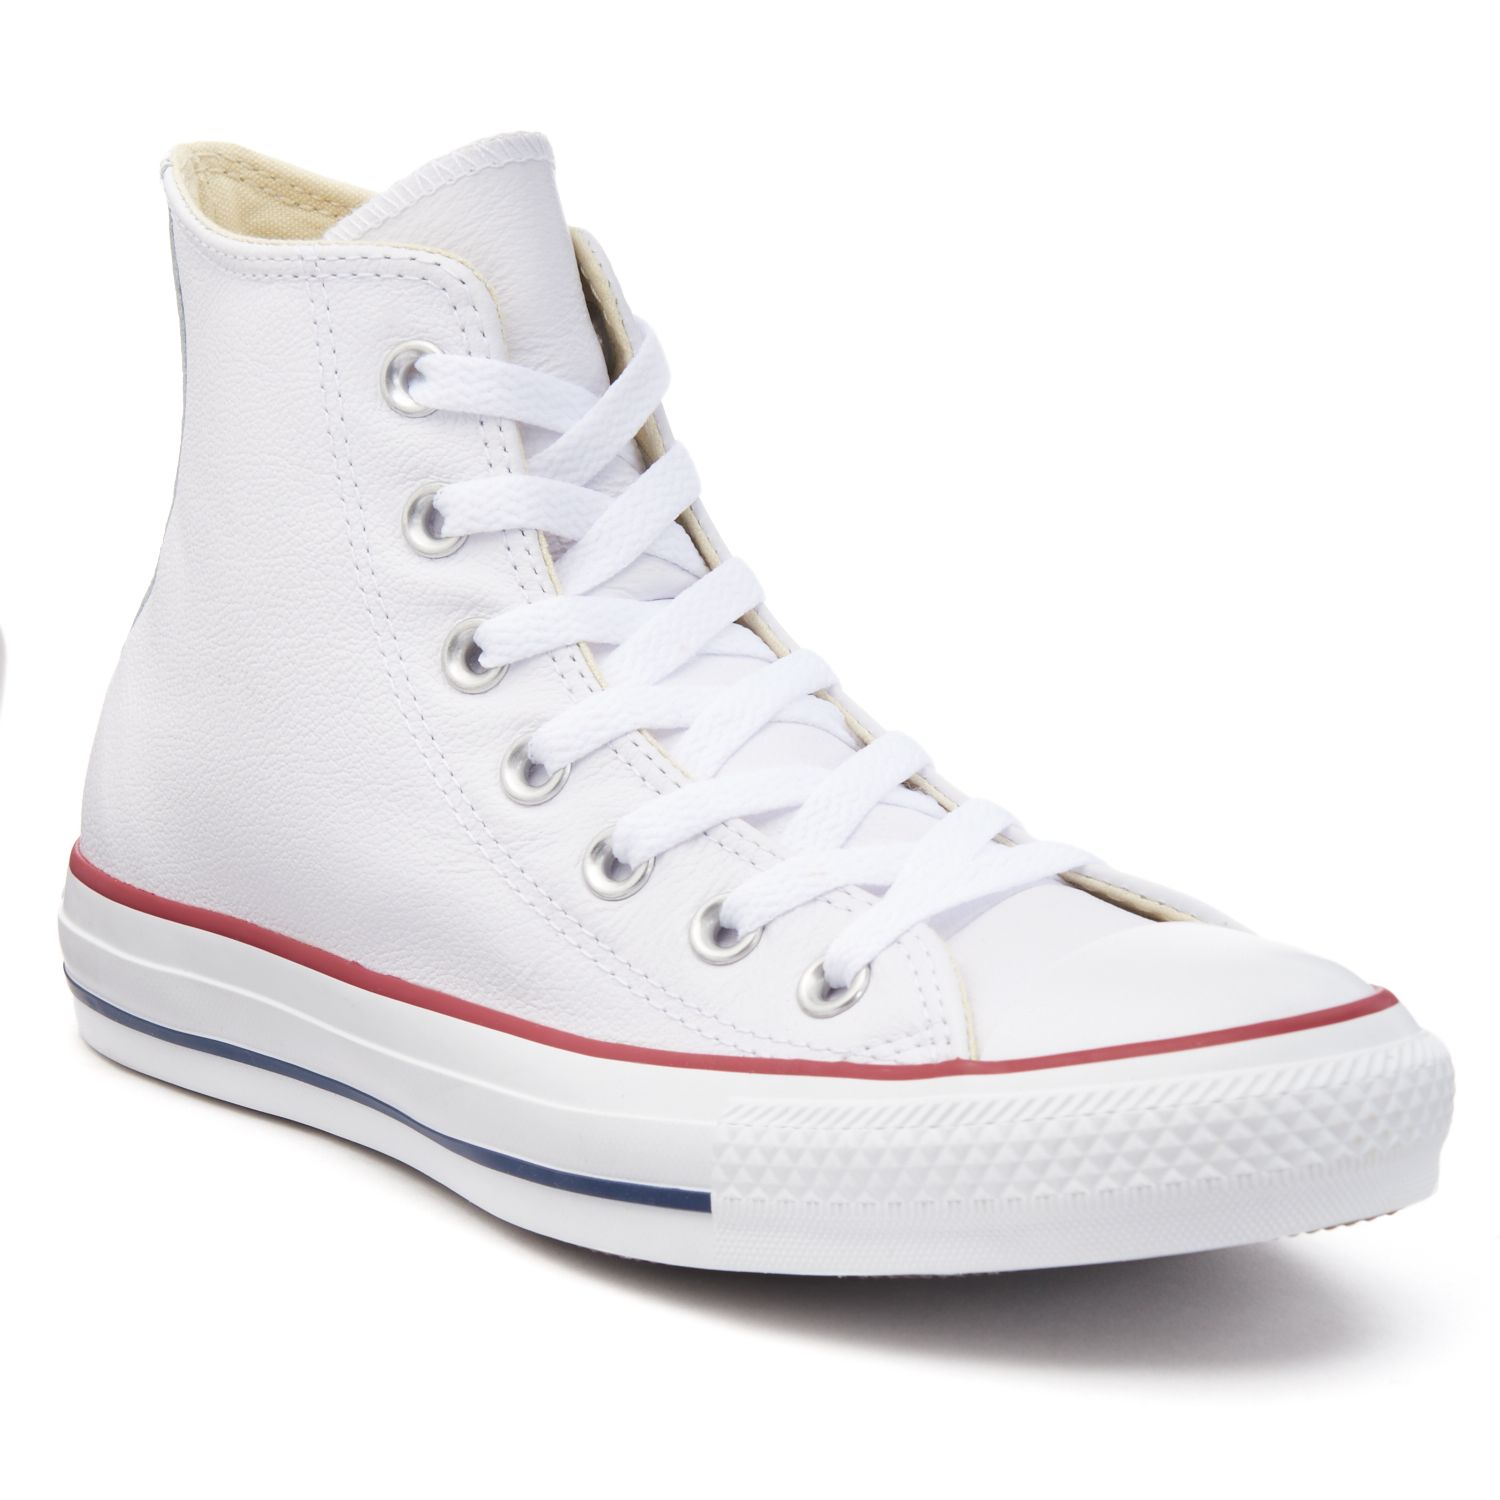 Adult Converse Chuck Taylor All Star Leather High-Top Sneakers